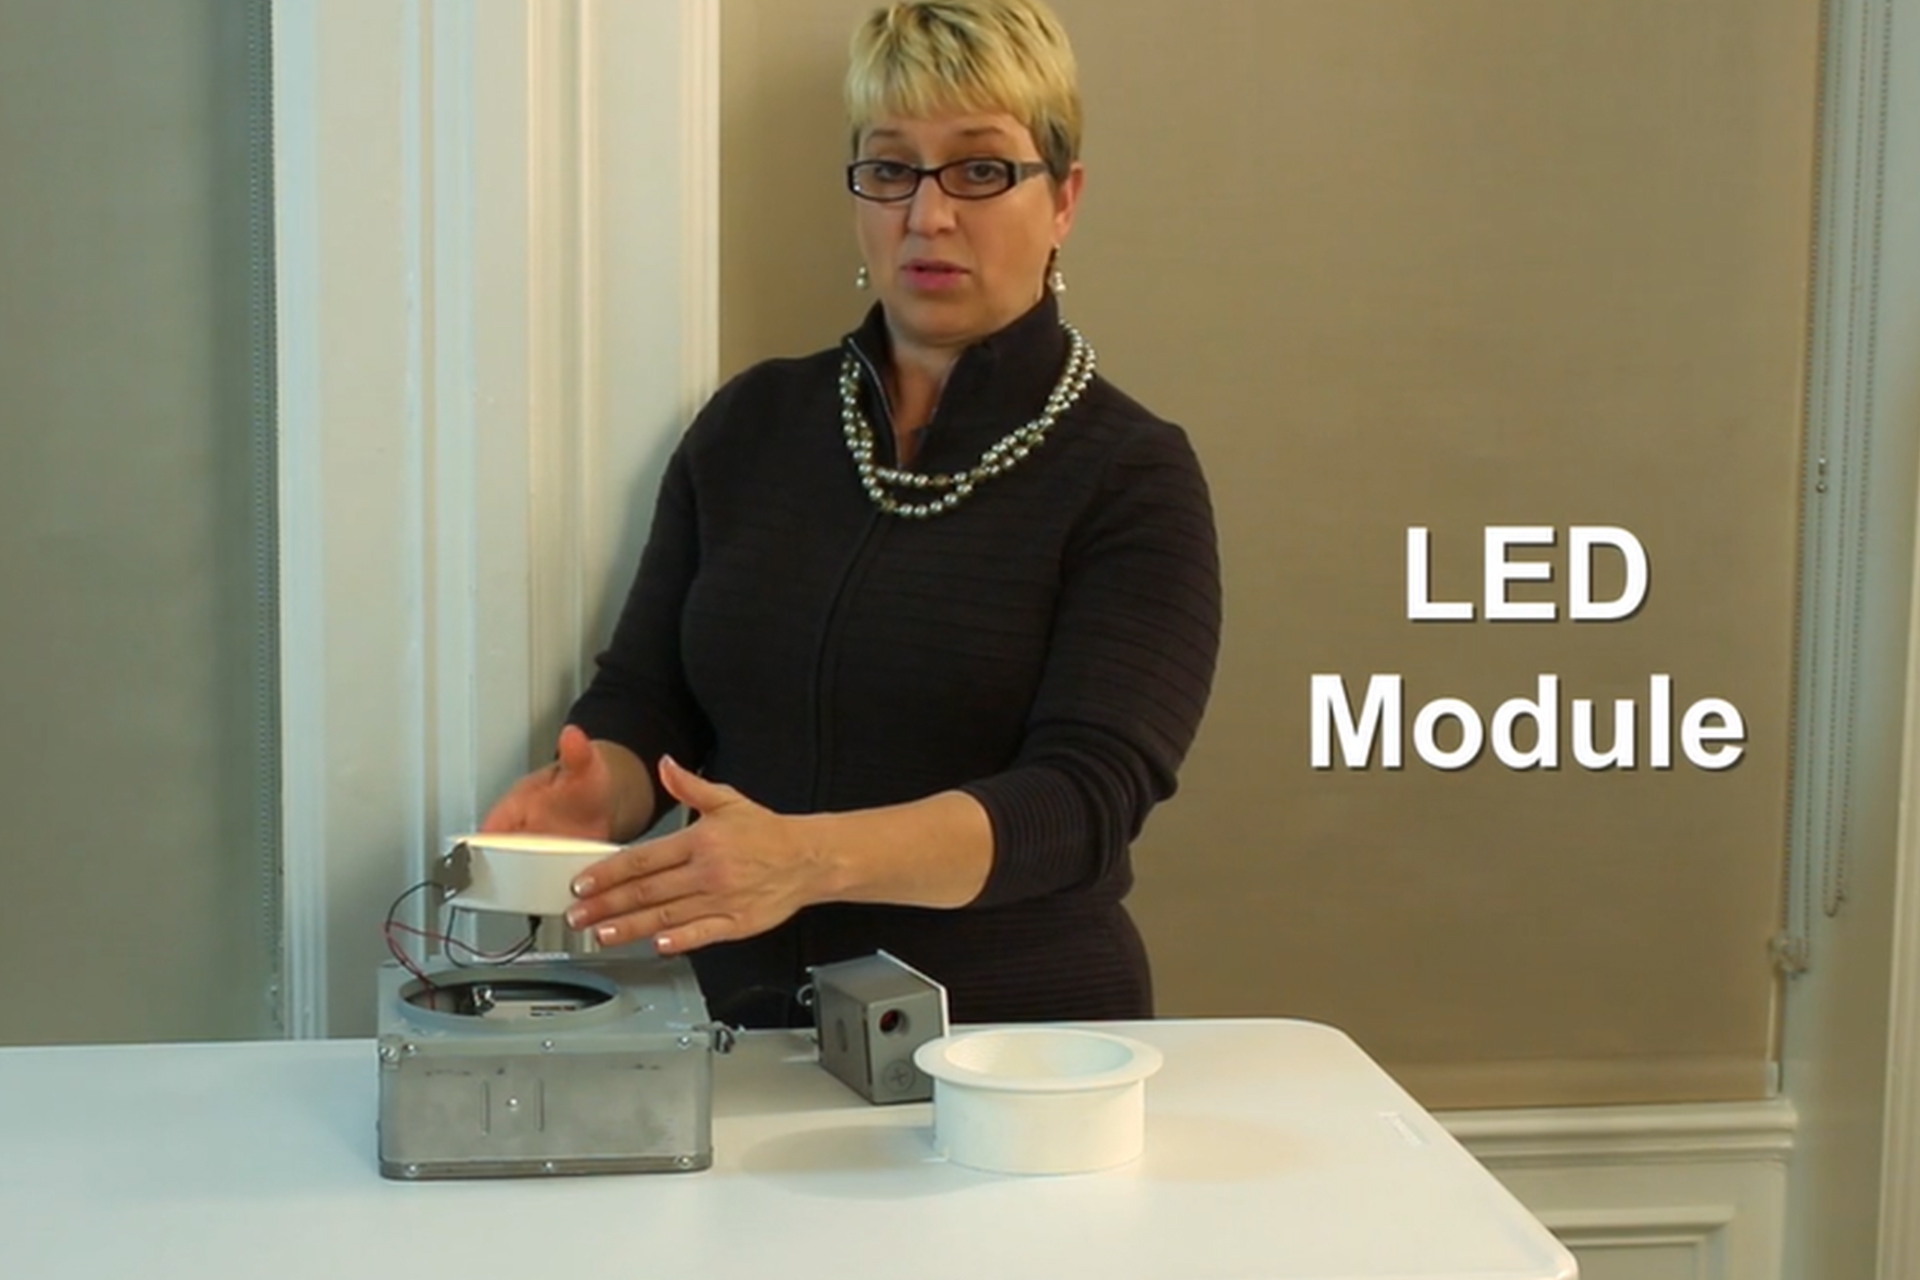 Annette Hladio, Unboxing of the A2-D2 down light and Wall washer kit